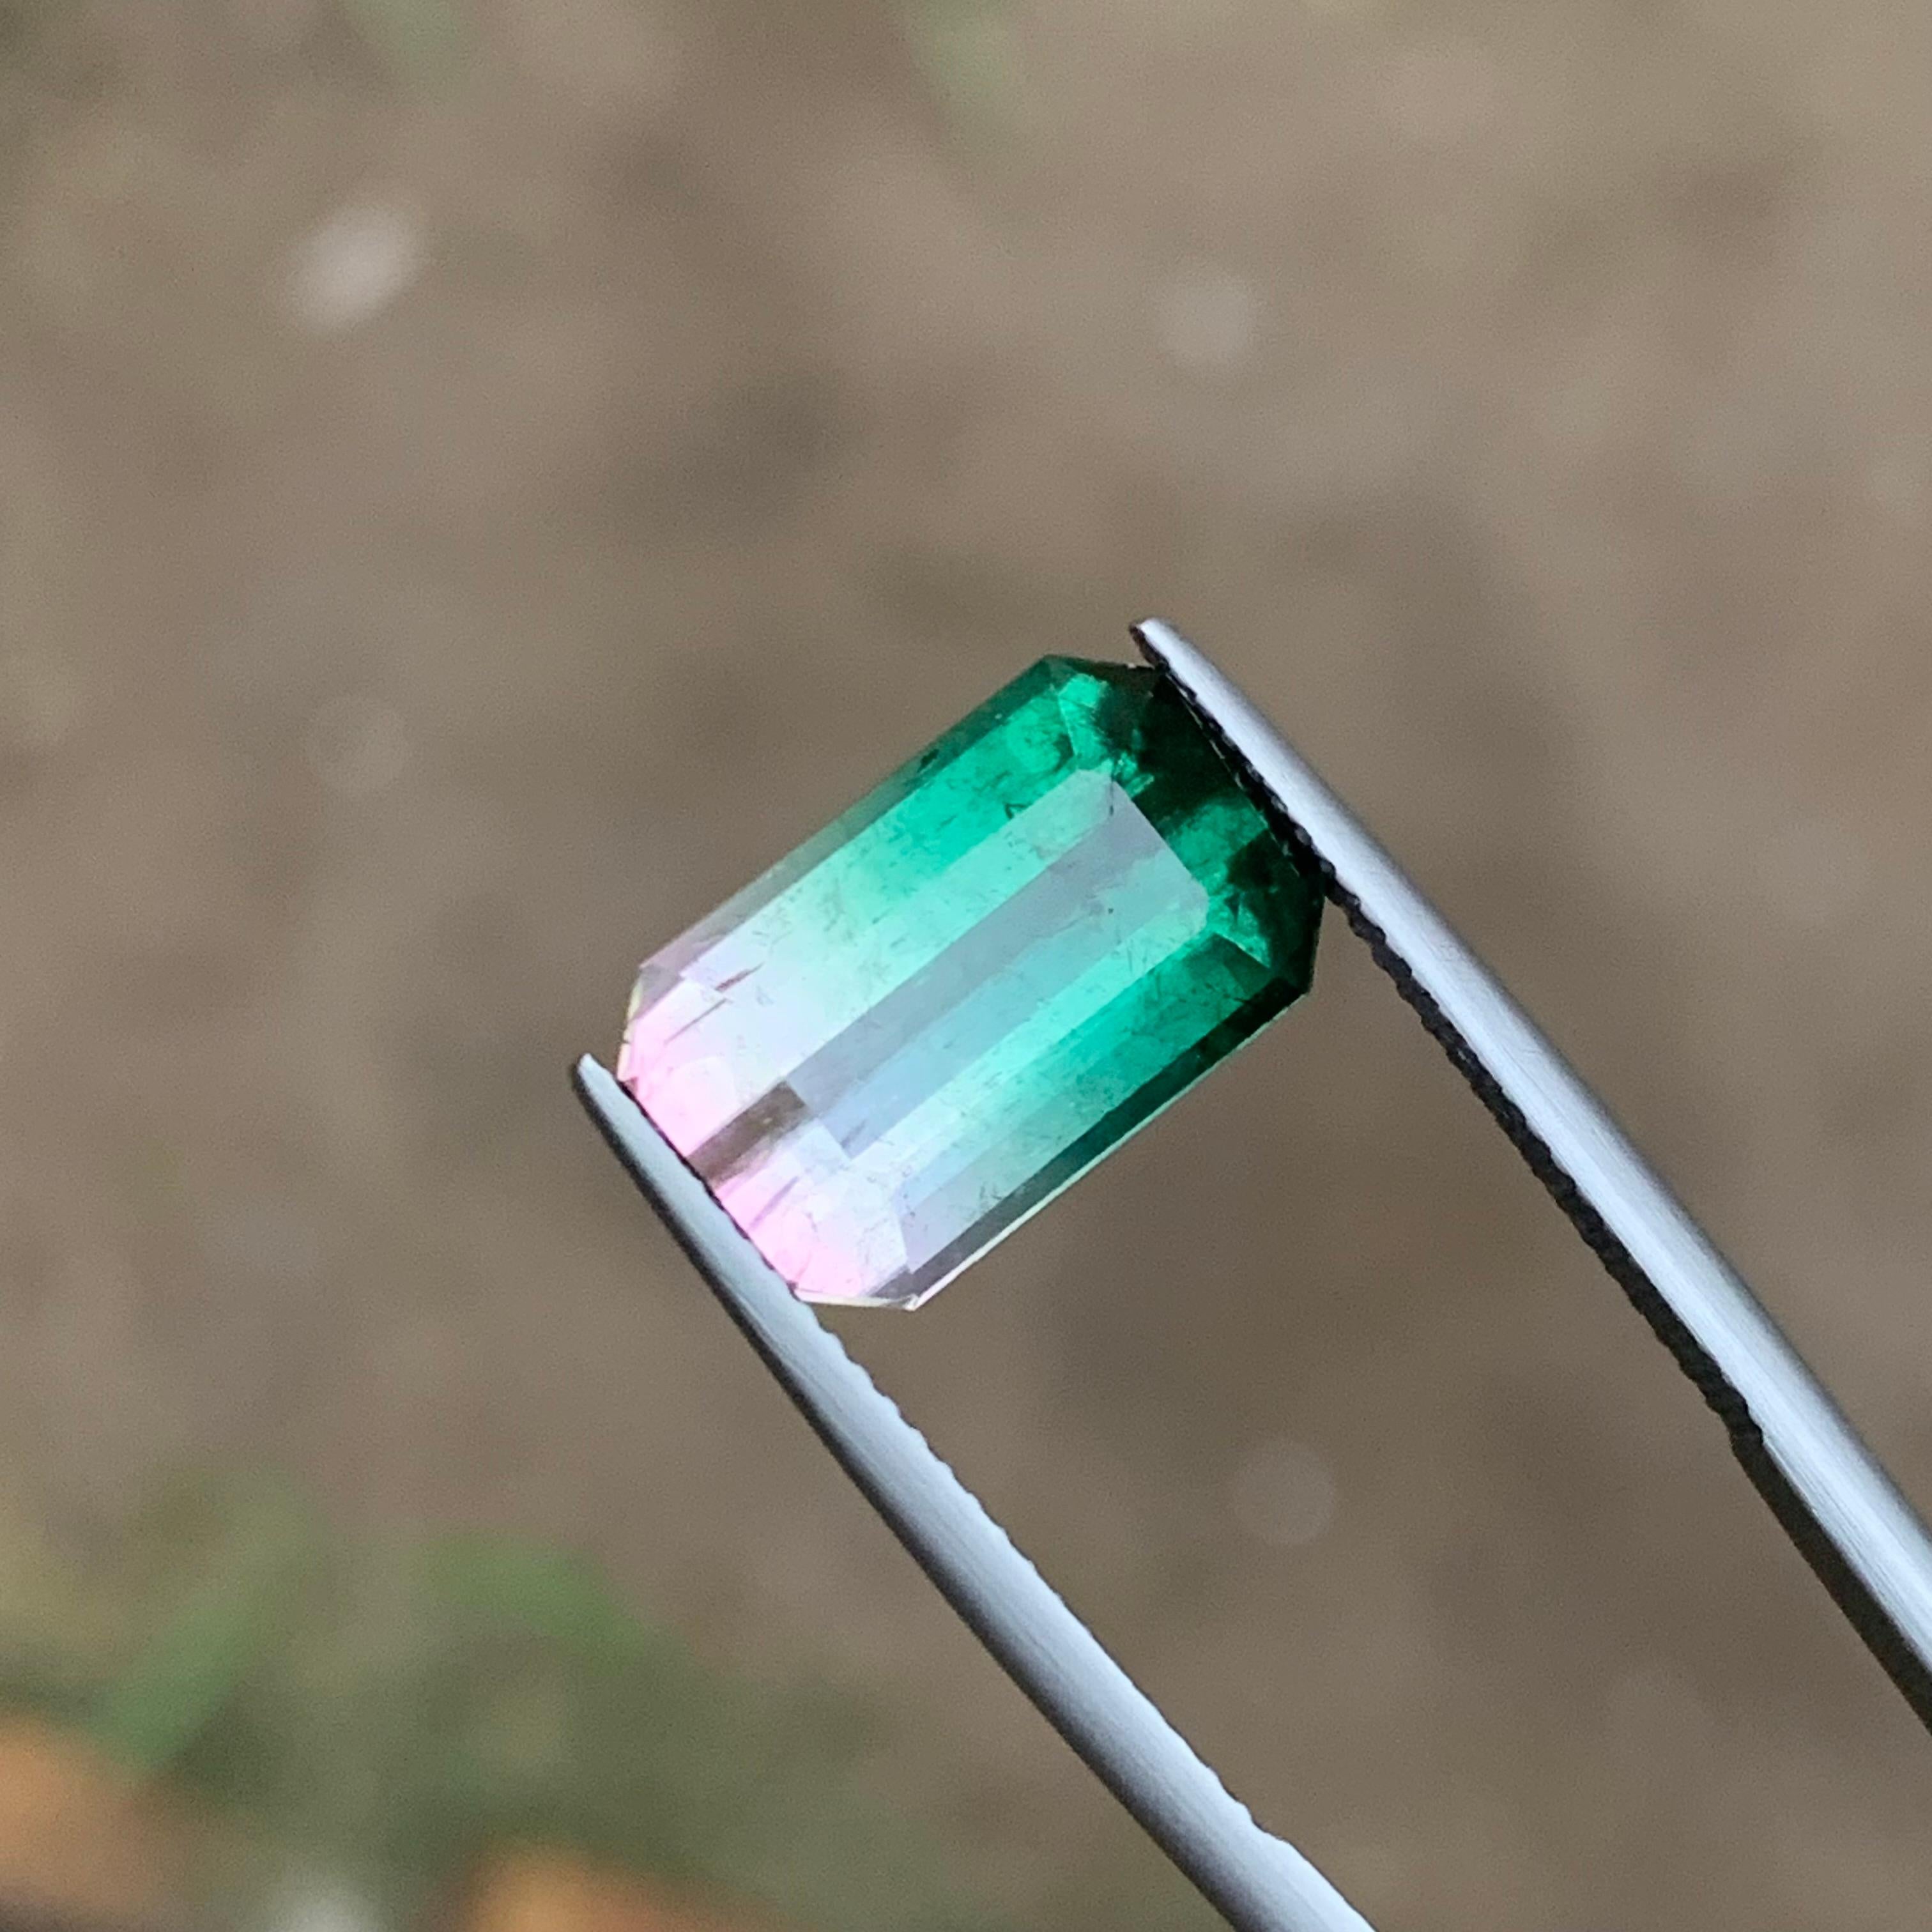 GEMSTONE TYPE: Tourmaline
PIECE(S): 1
WEIGHT: 7.30 Carat
SHAPE: Emerald Cut
SIZE (MM): 14.23 x 9.02 x 6.46
COLOR: Watermelon Bicolor Bluish Green & Pink
CLARITY: Slightly Included
TREATMENT: Heated
ORIGIN: Afghanistan
CERTIFICATE: On demand

A very